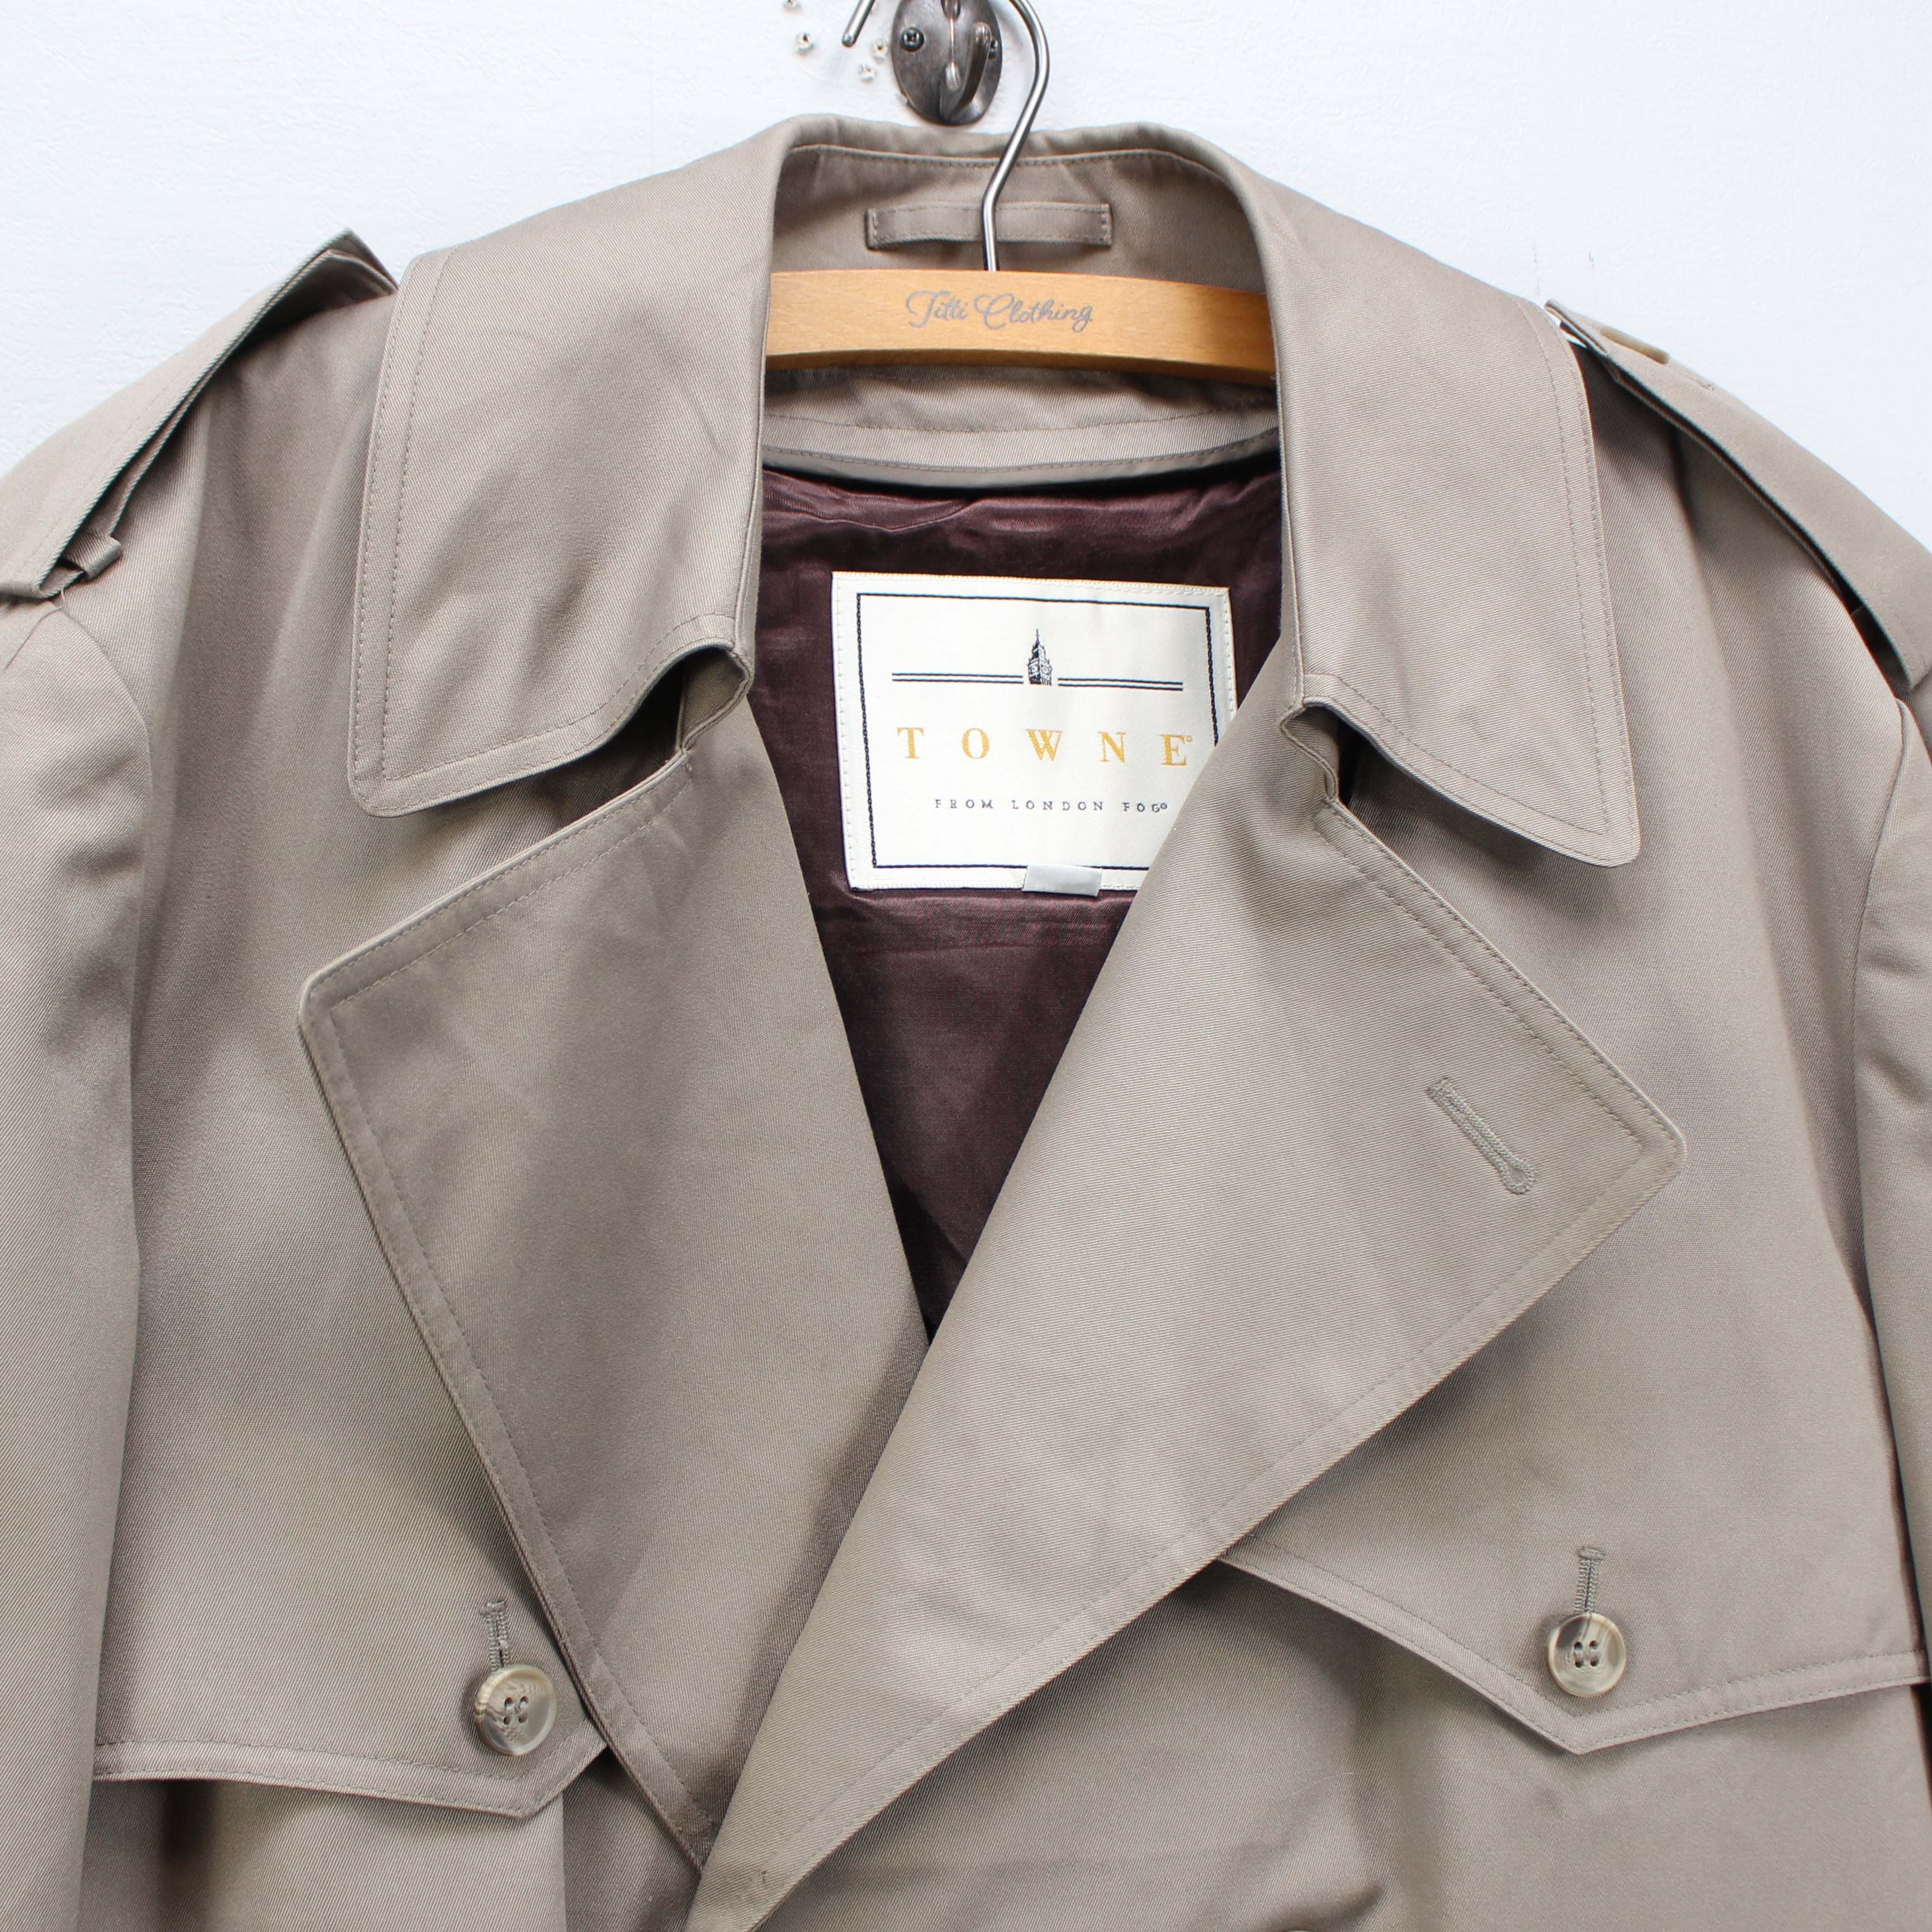 USA VINTAGE TOWNE BY LONDON FOG TRENCH COAT WITH LINER/アメリカ